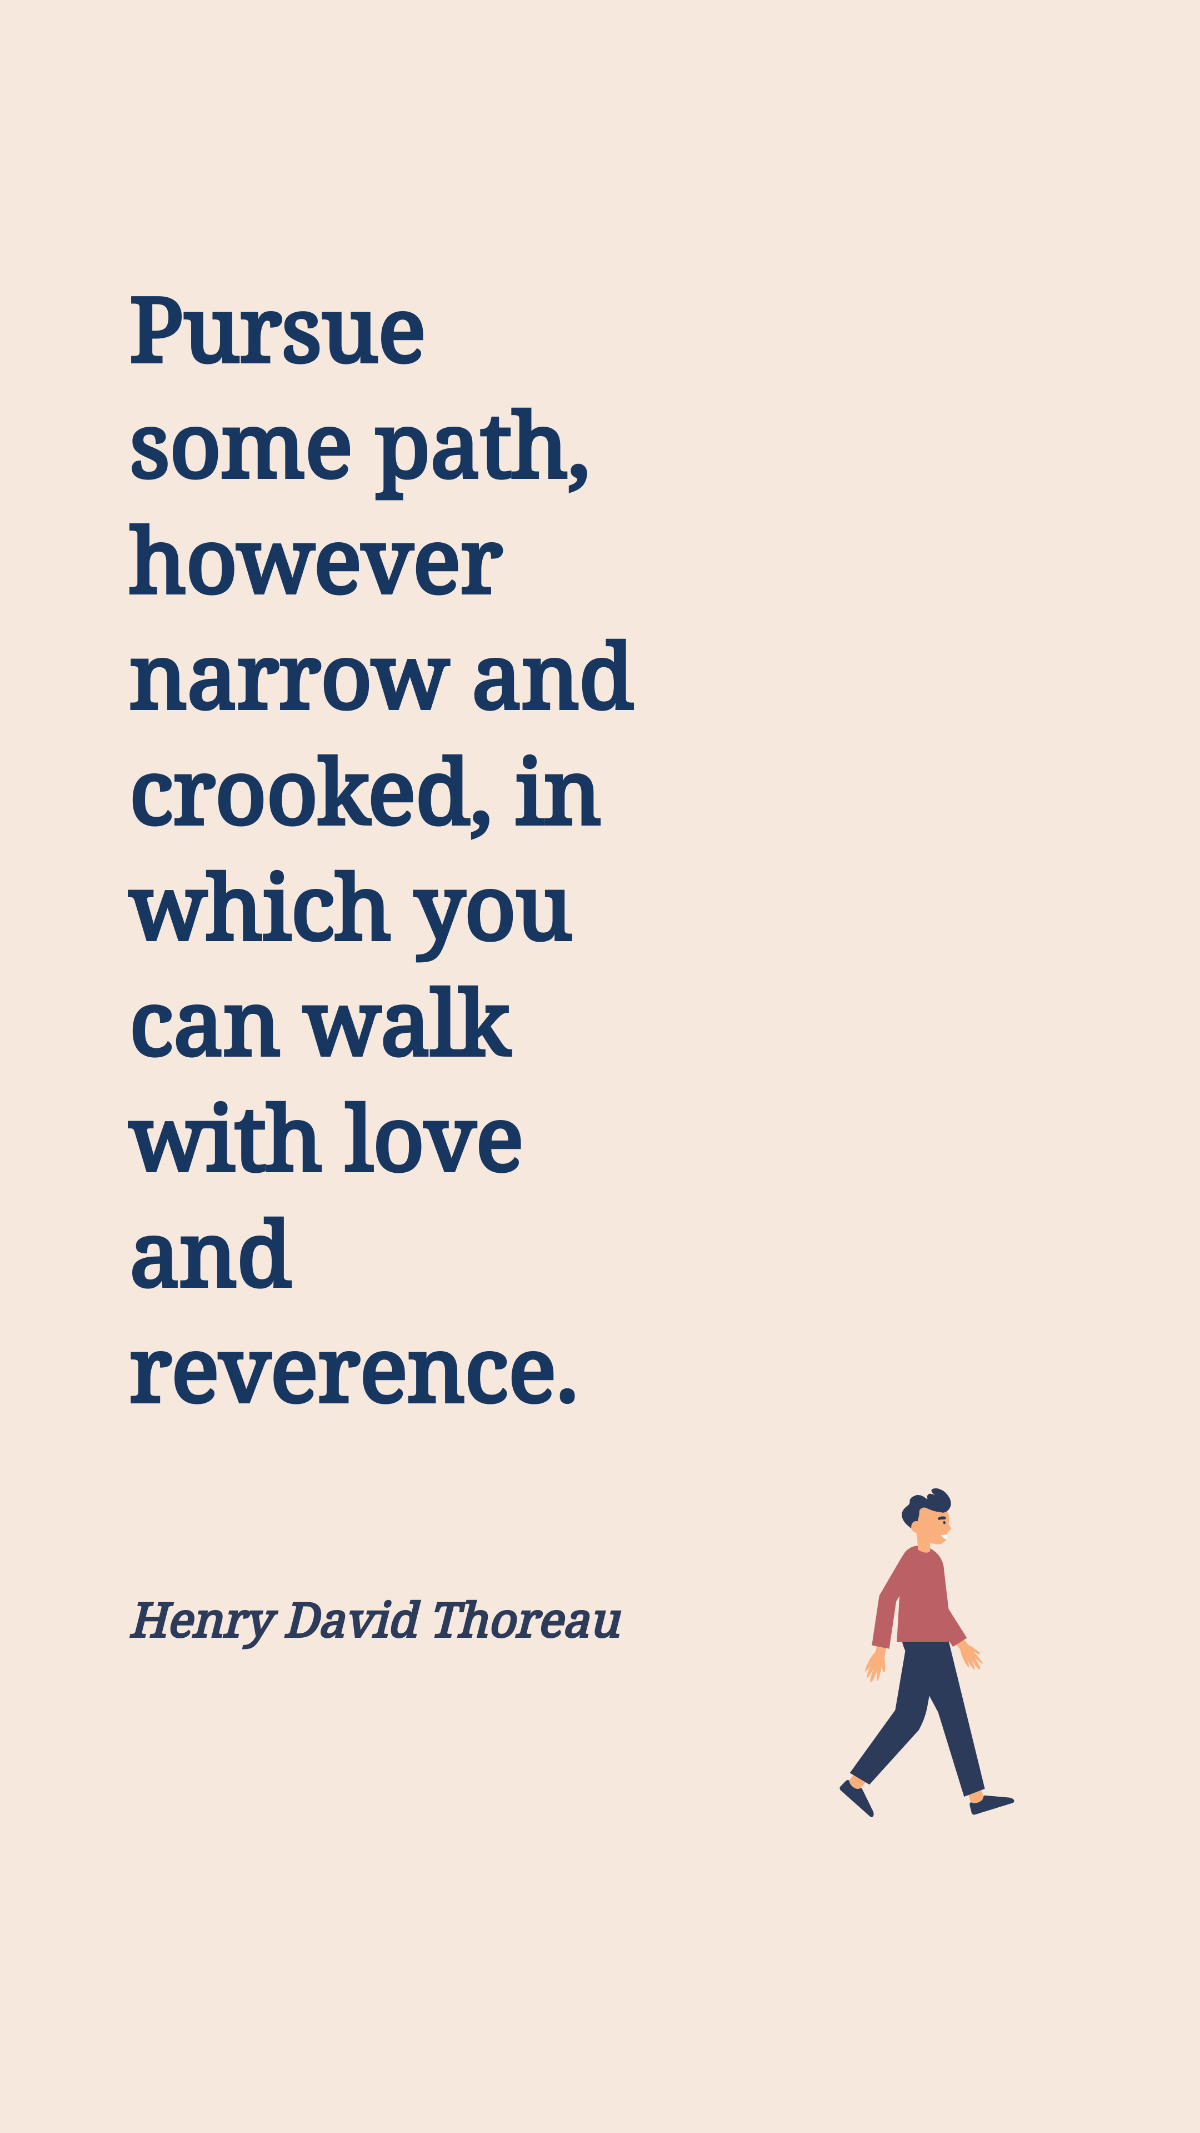 Henry David Thoreau - Pursue some path, however narrow and crooked, in which you can walk with love and reverence. Template